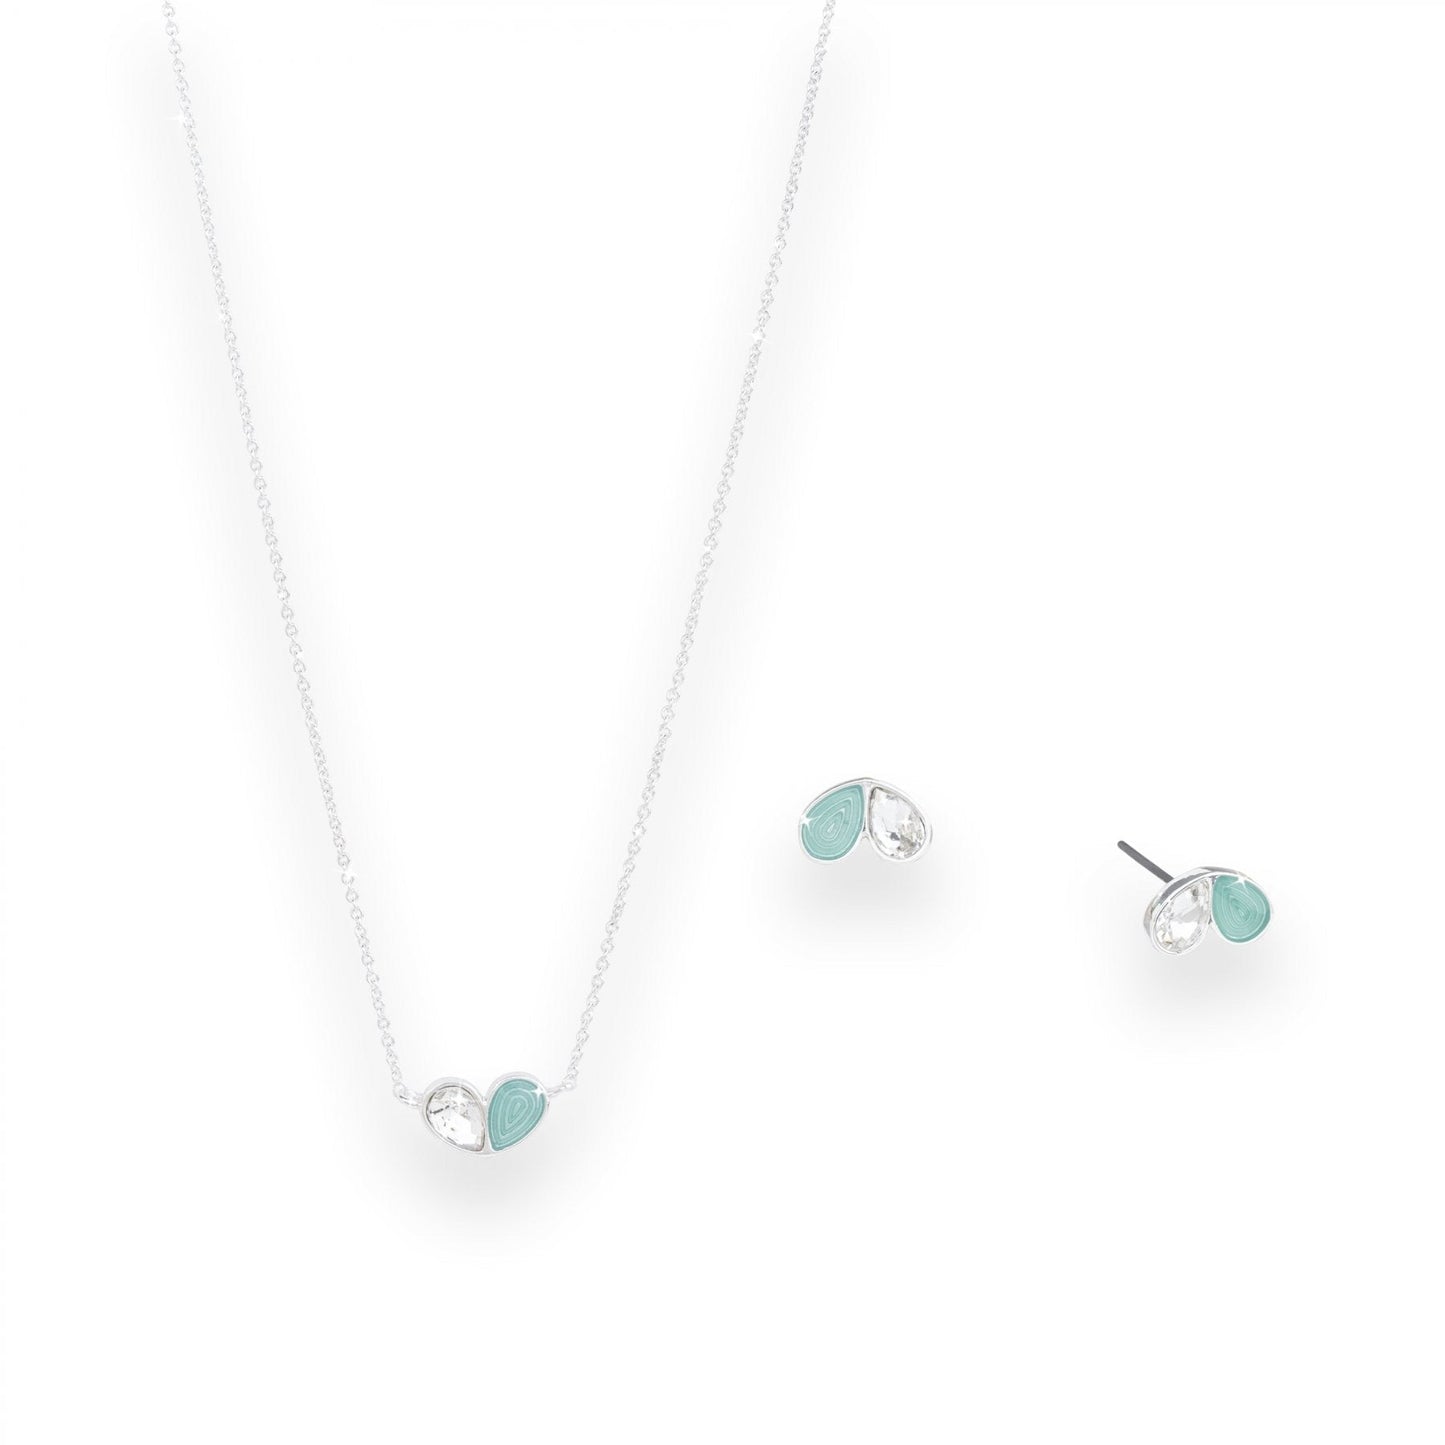 Contemporary Heart Necklace and Earring Set